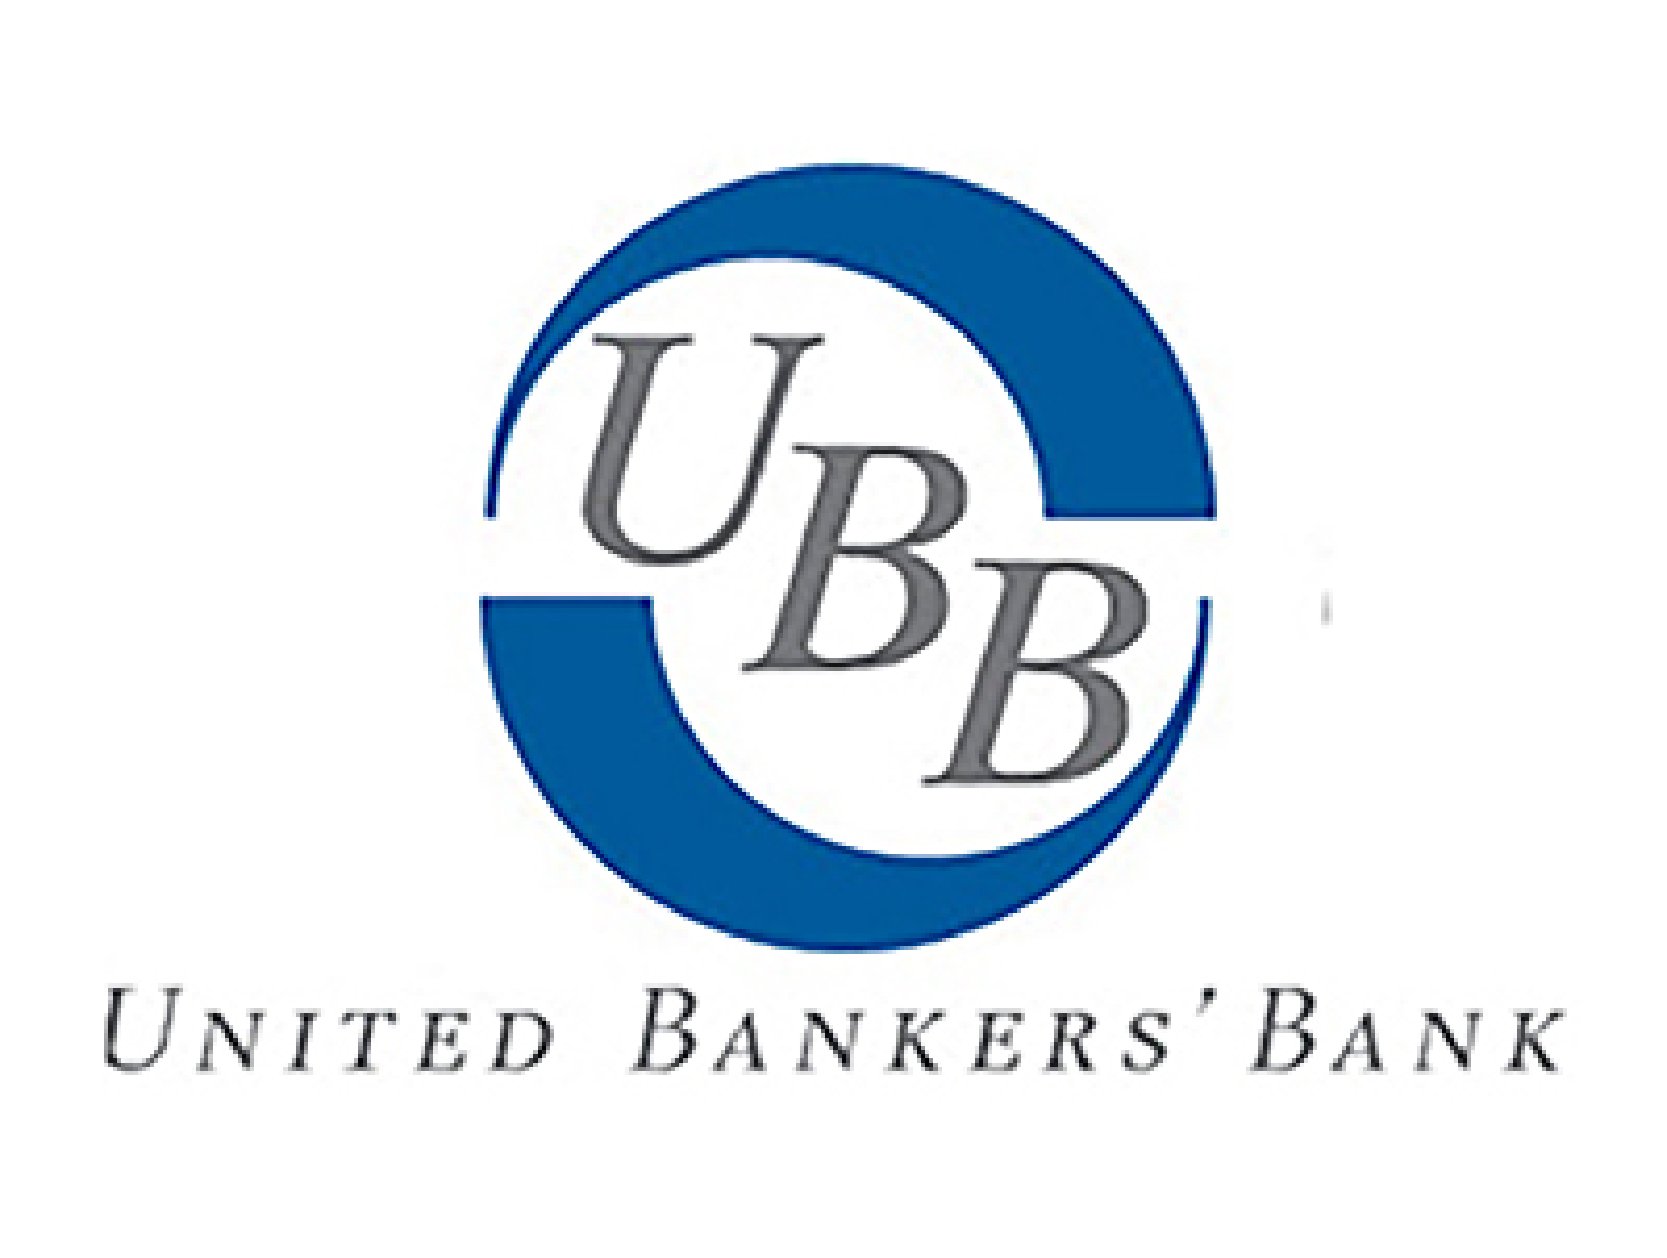 By United Bankers' Bank